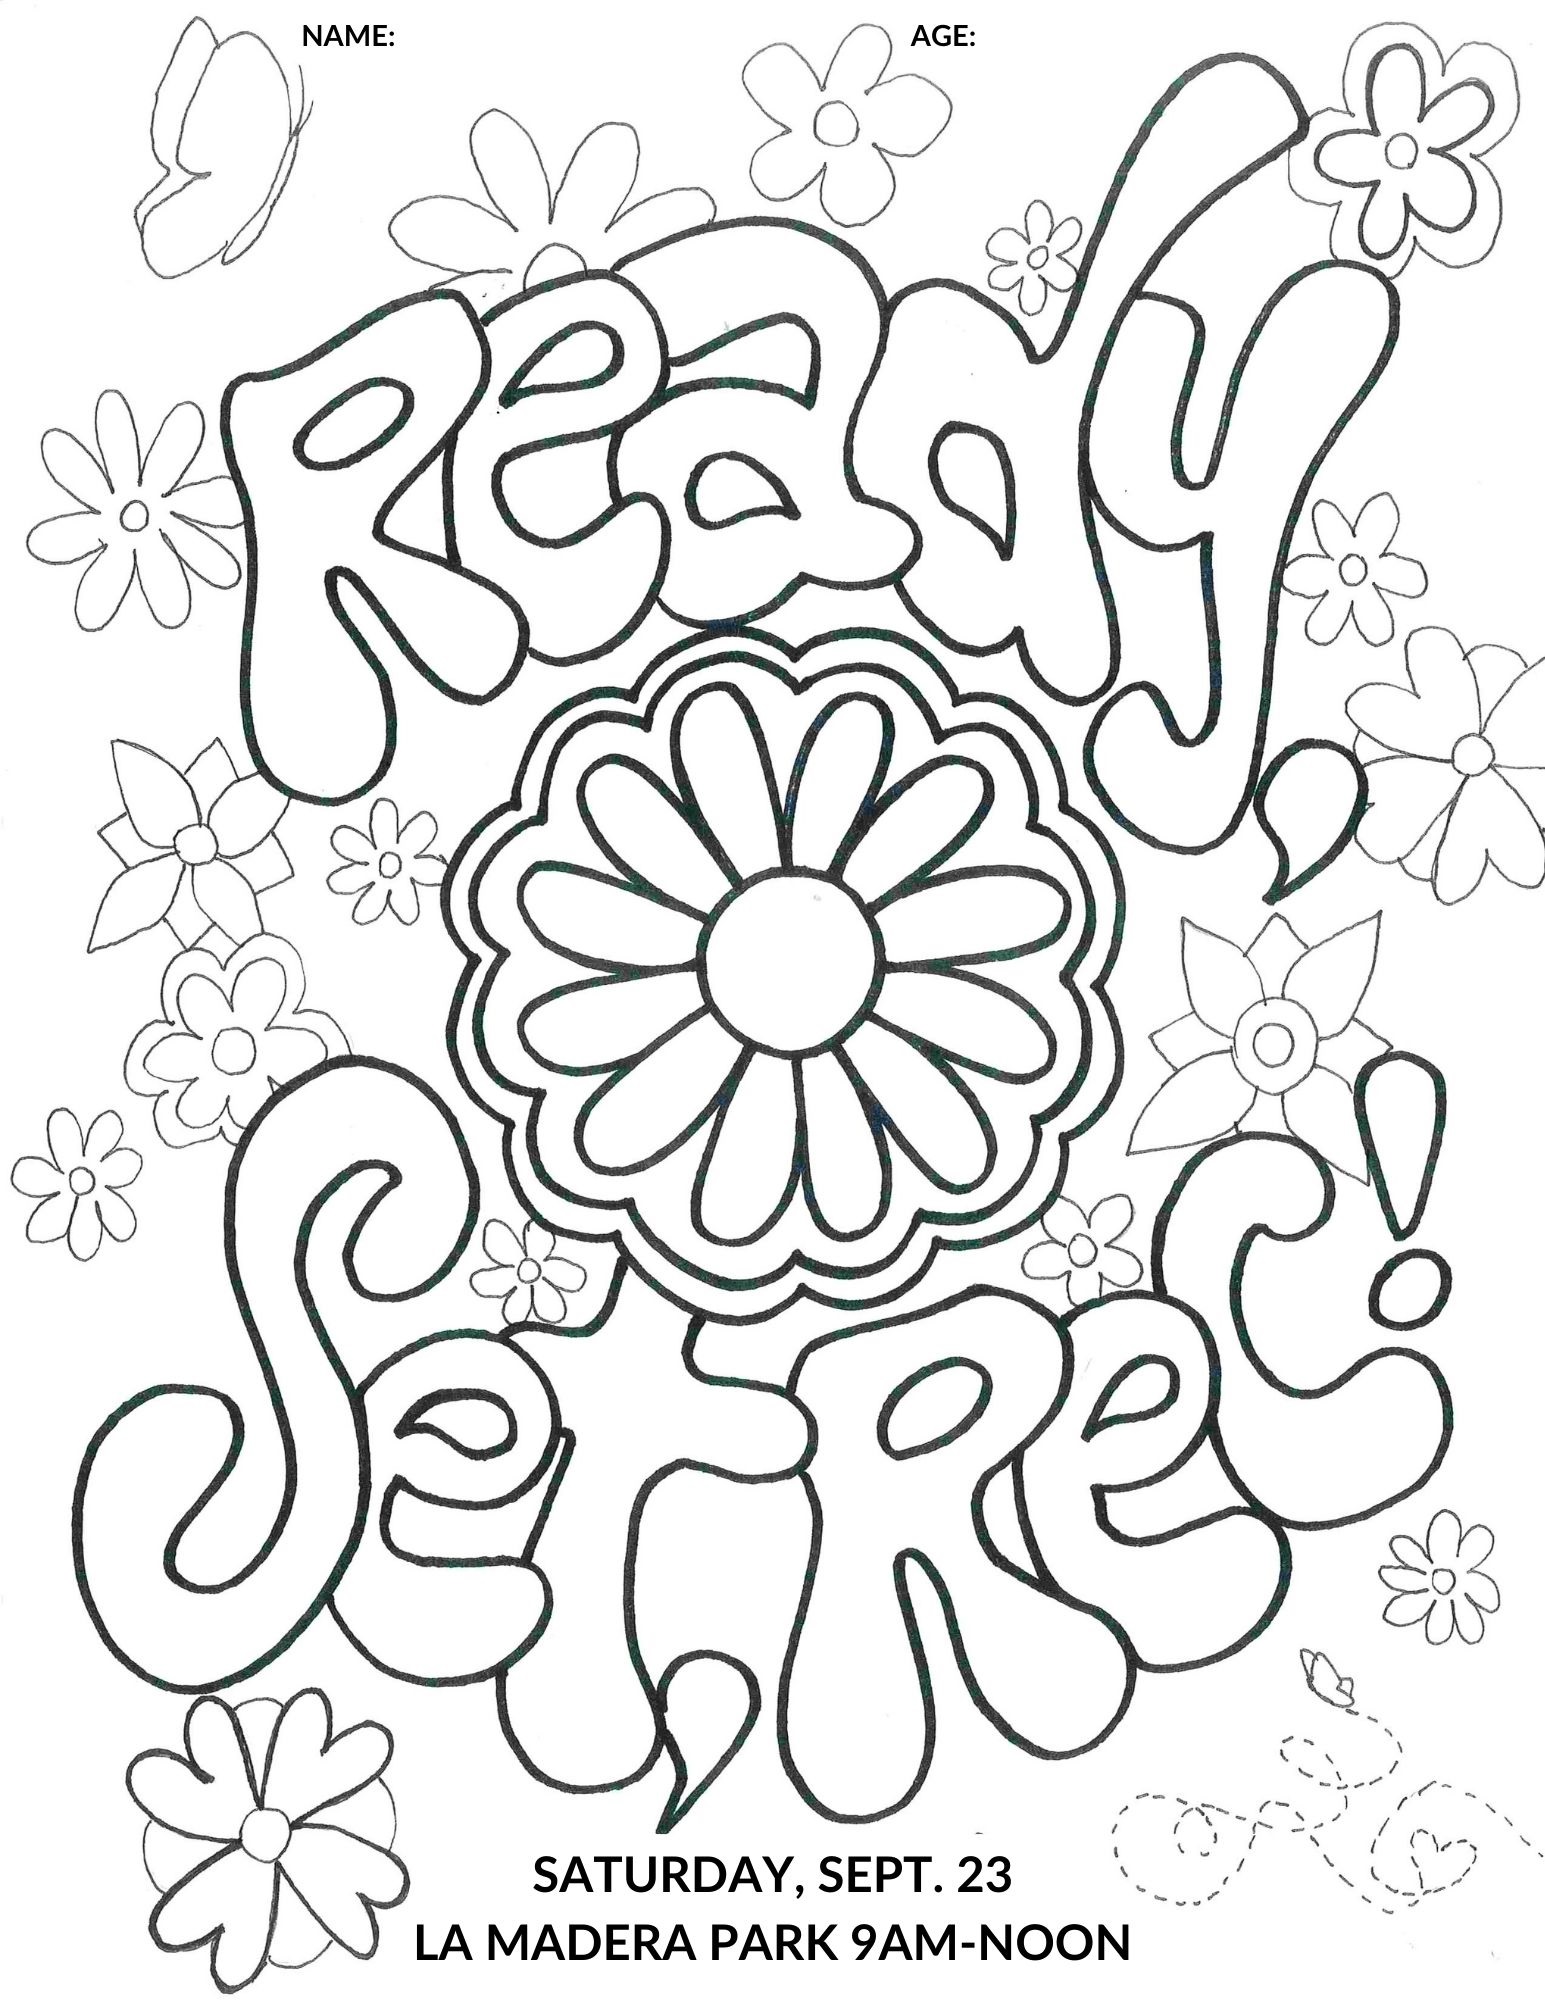 RSR Coloring Page (FINAL).jpg